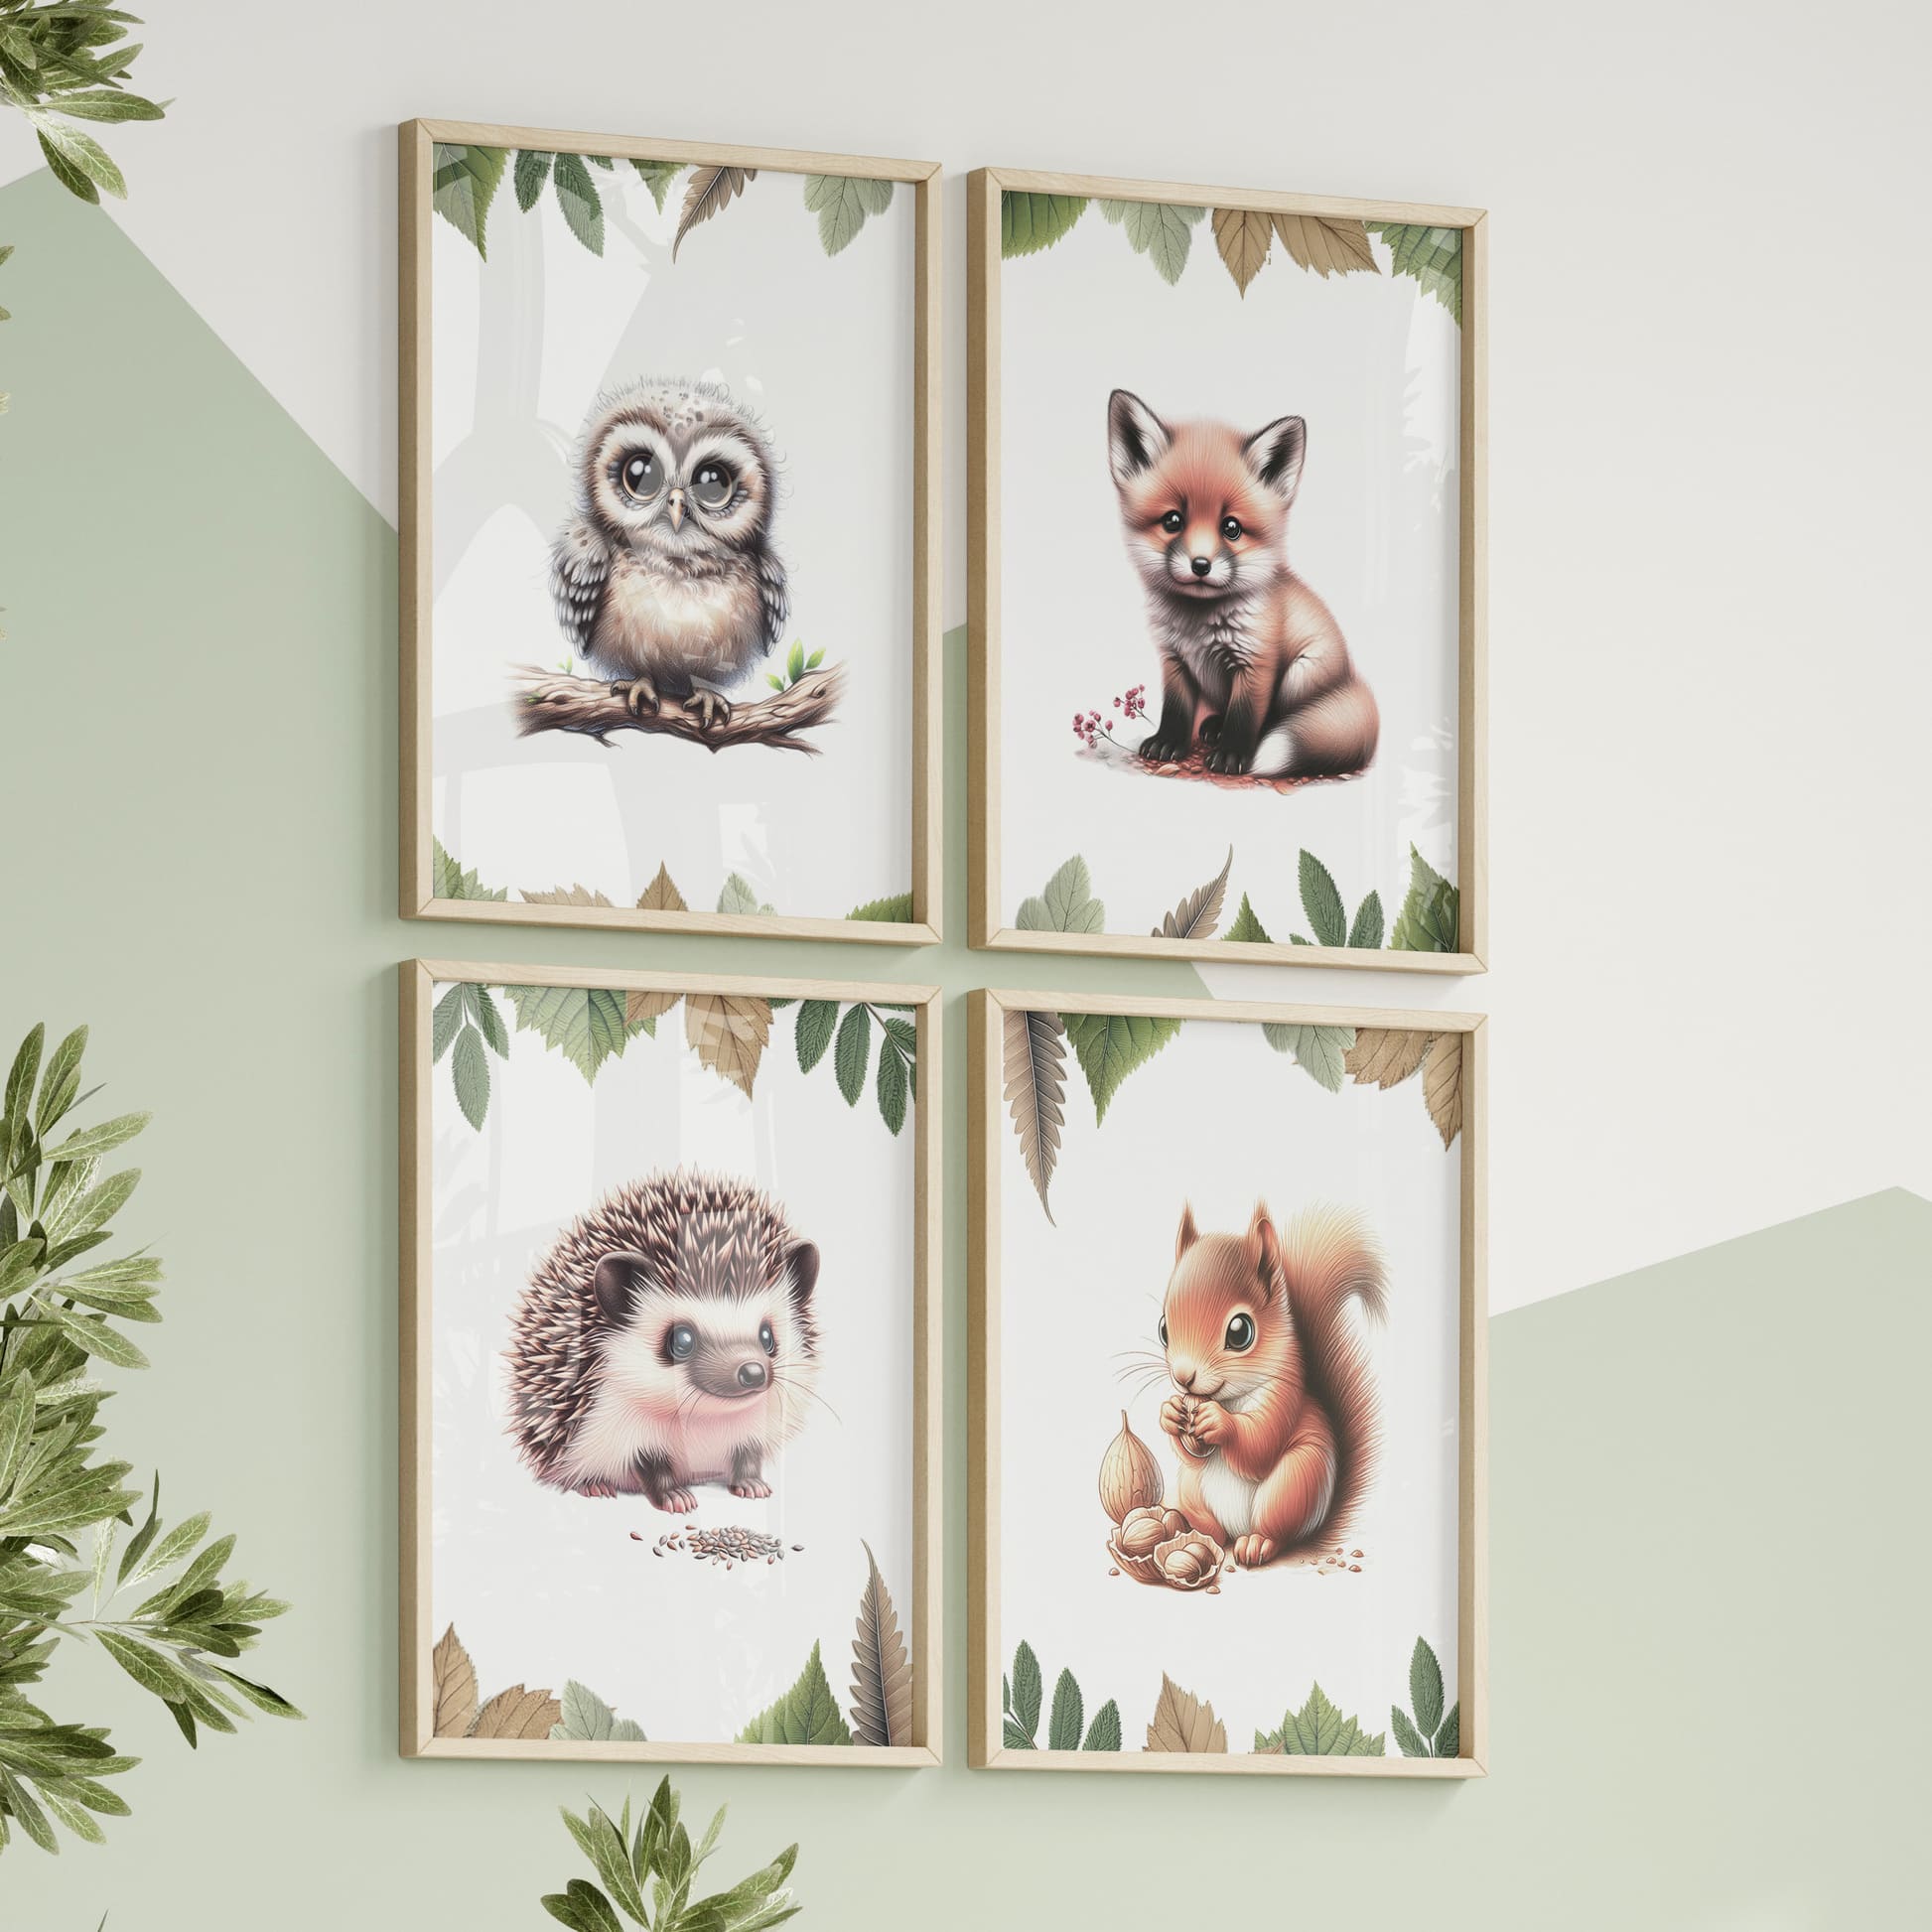 Set of four A4 prints featuring woodland baby animals - owl, fox, badger, and squirrel. The animals are depicted in a cartoony style, resembling coloured pencil drawings. Woodland leaves decorate the edges of the prints.